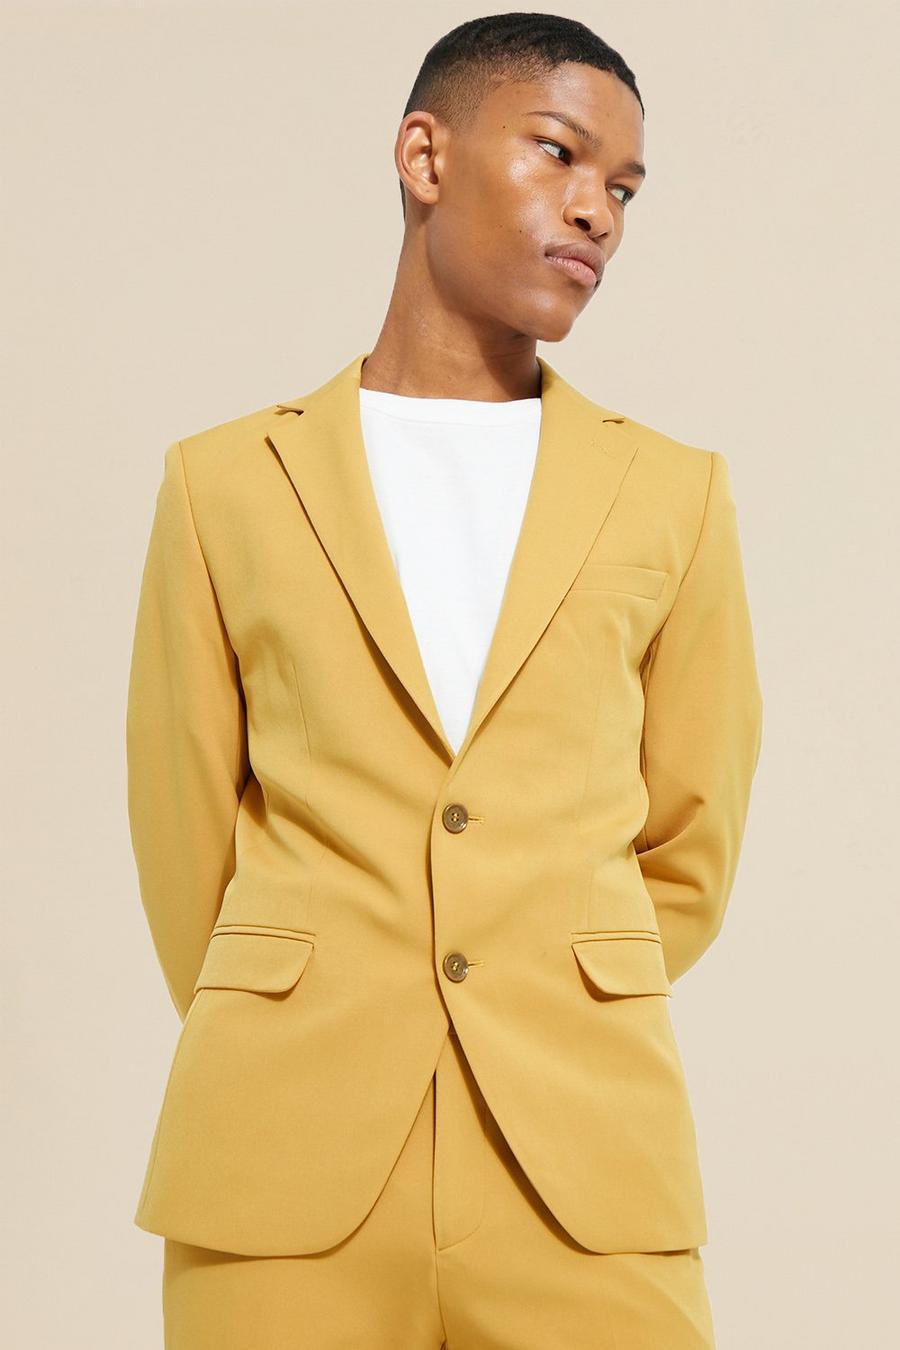 Mustard yellow Skinny Single Breasted Suit Jacket image number 1